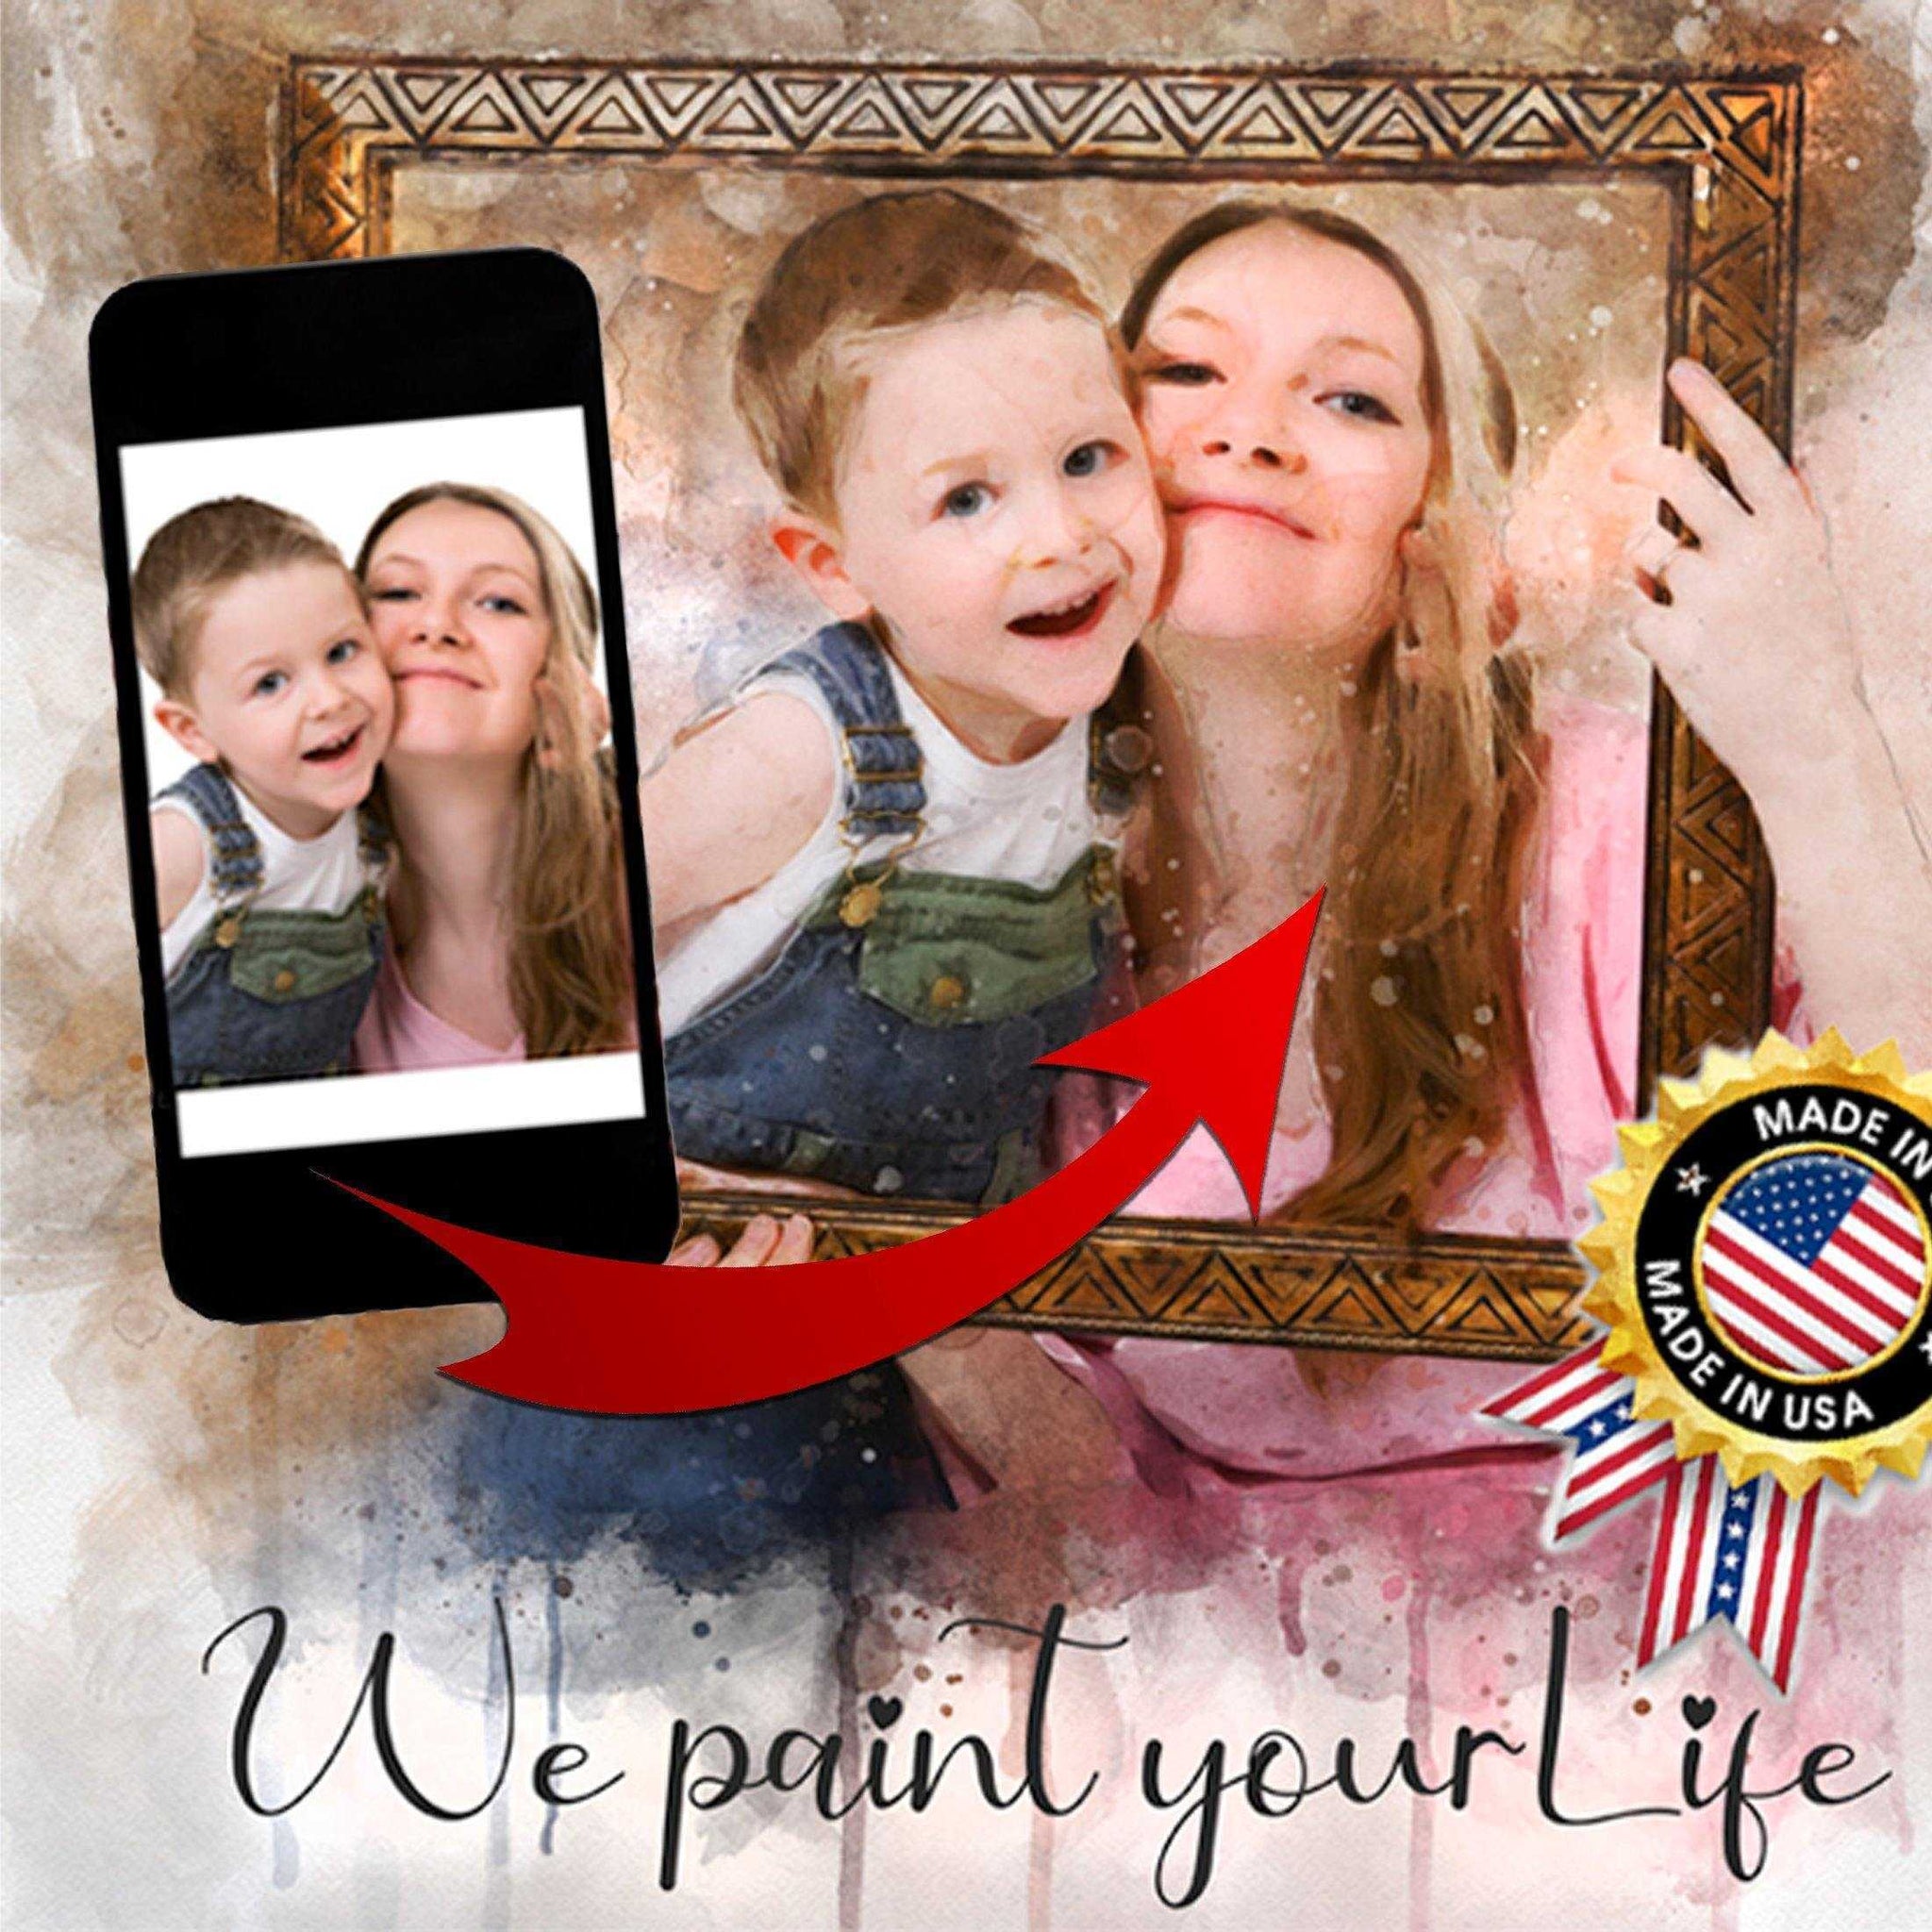 Order Your Custom House Painting in 5 Minutes. Follow the EASY Steps below - FromPicToArt